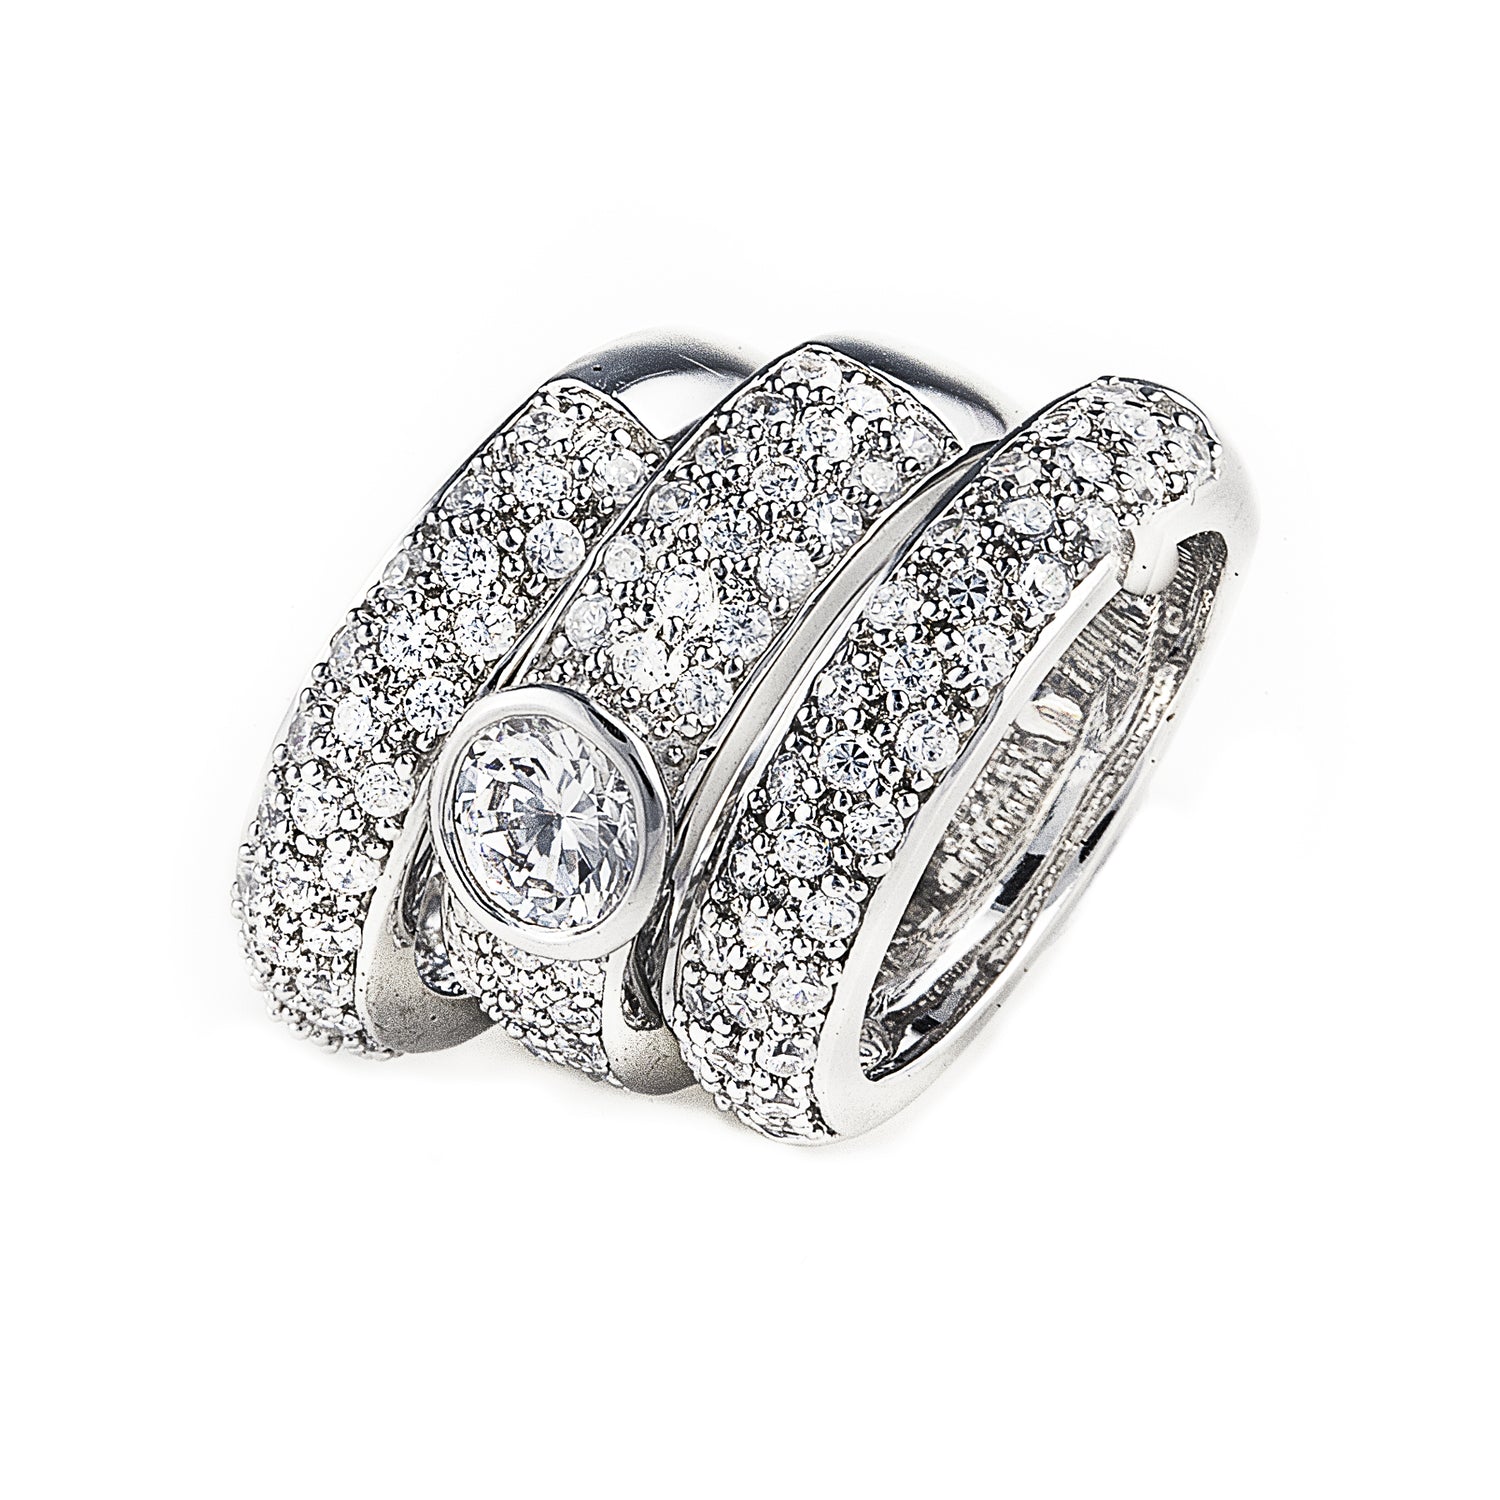 Angelica Ring has 3 separate bands in 925 sterling silver. Pavé setting with cubic zirconia stones. The centre ring has a large cubic zirconia stone. Shop rings & affordable luxury jewellery by Bellagio & Co. Worldwide shipping